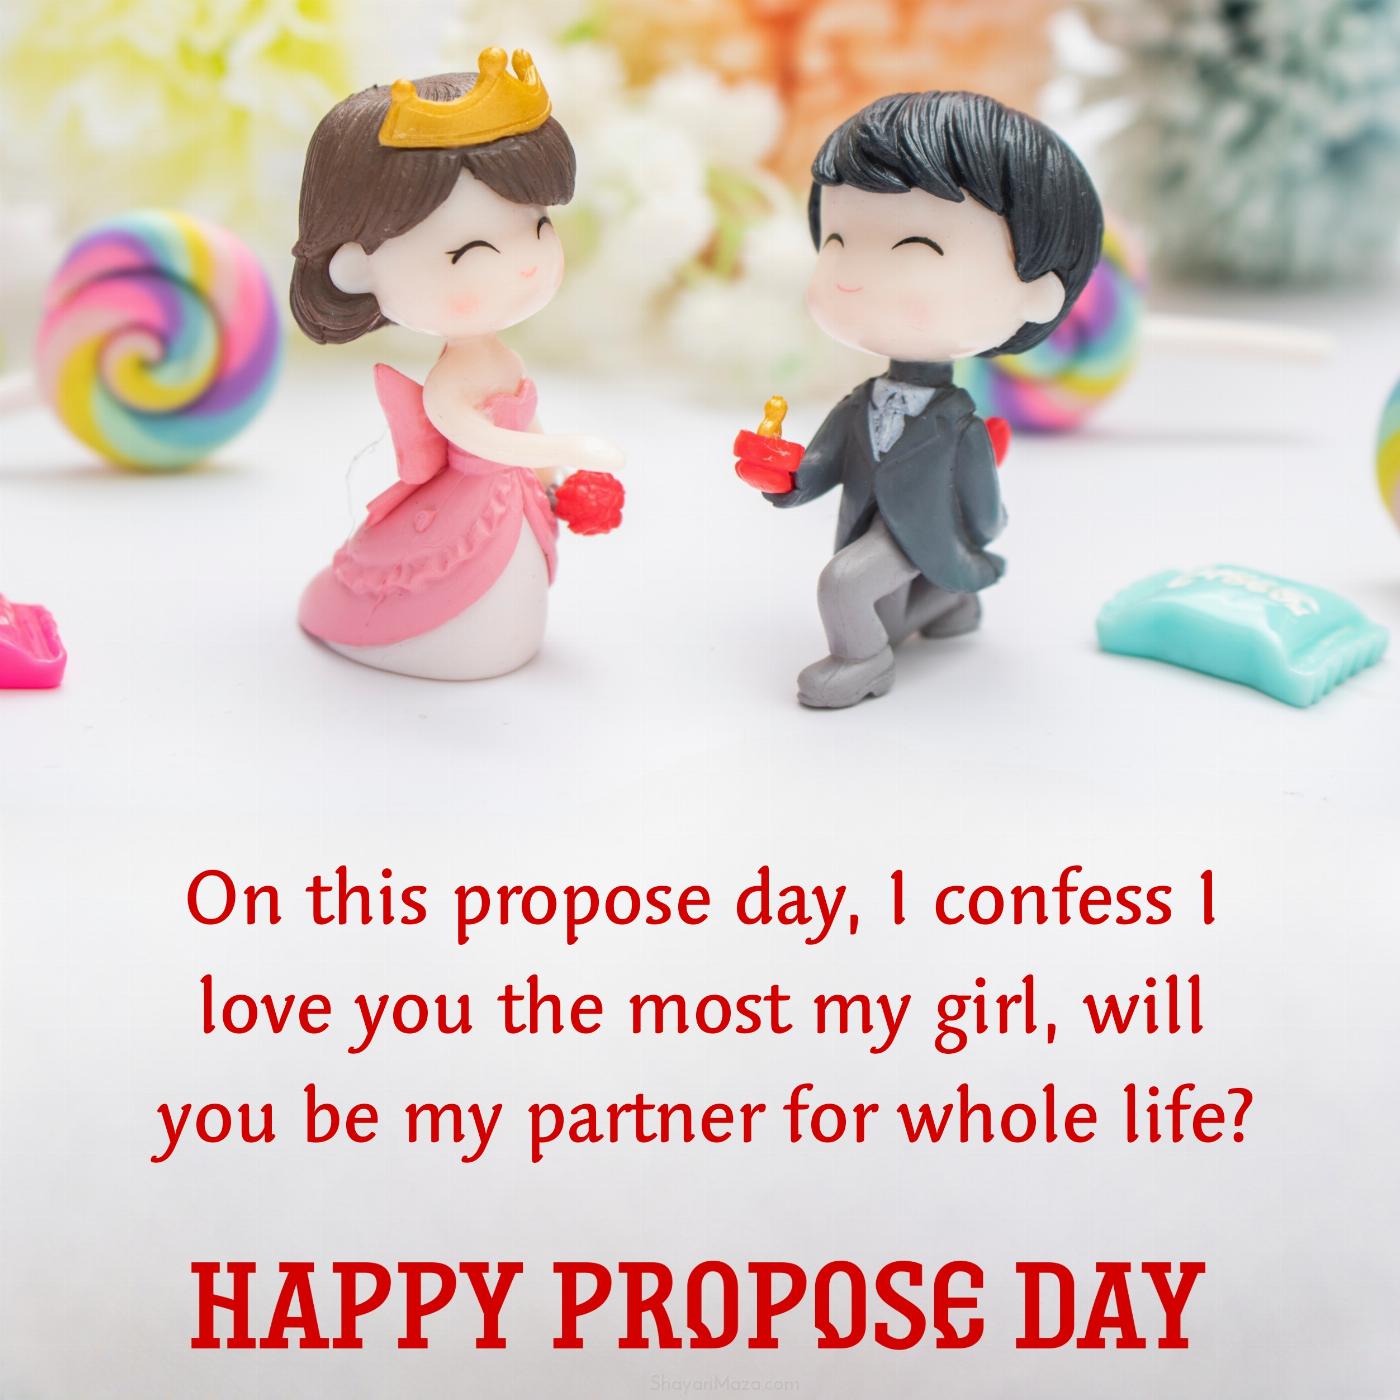 On this propose day I confess I love you the most my girl